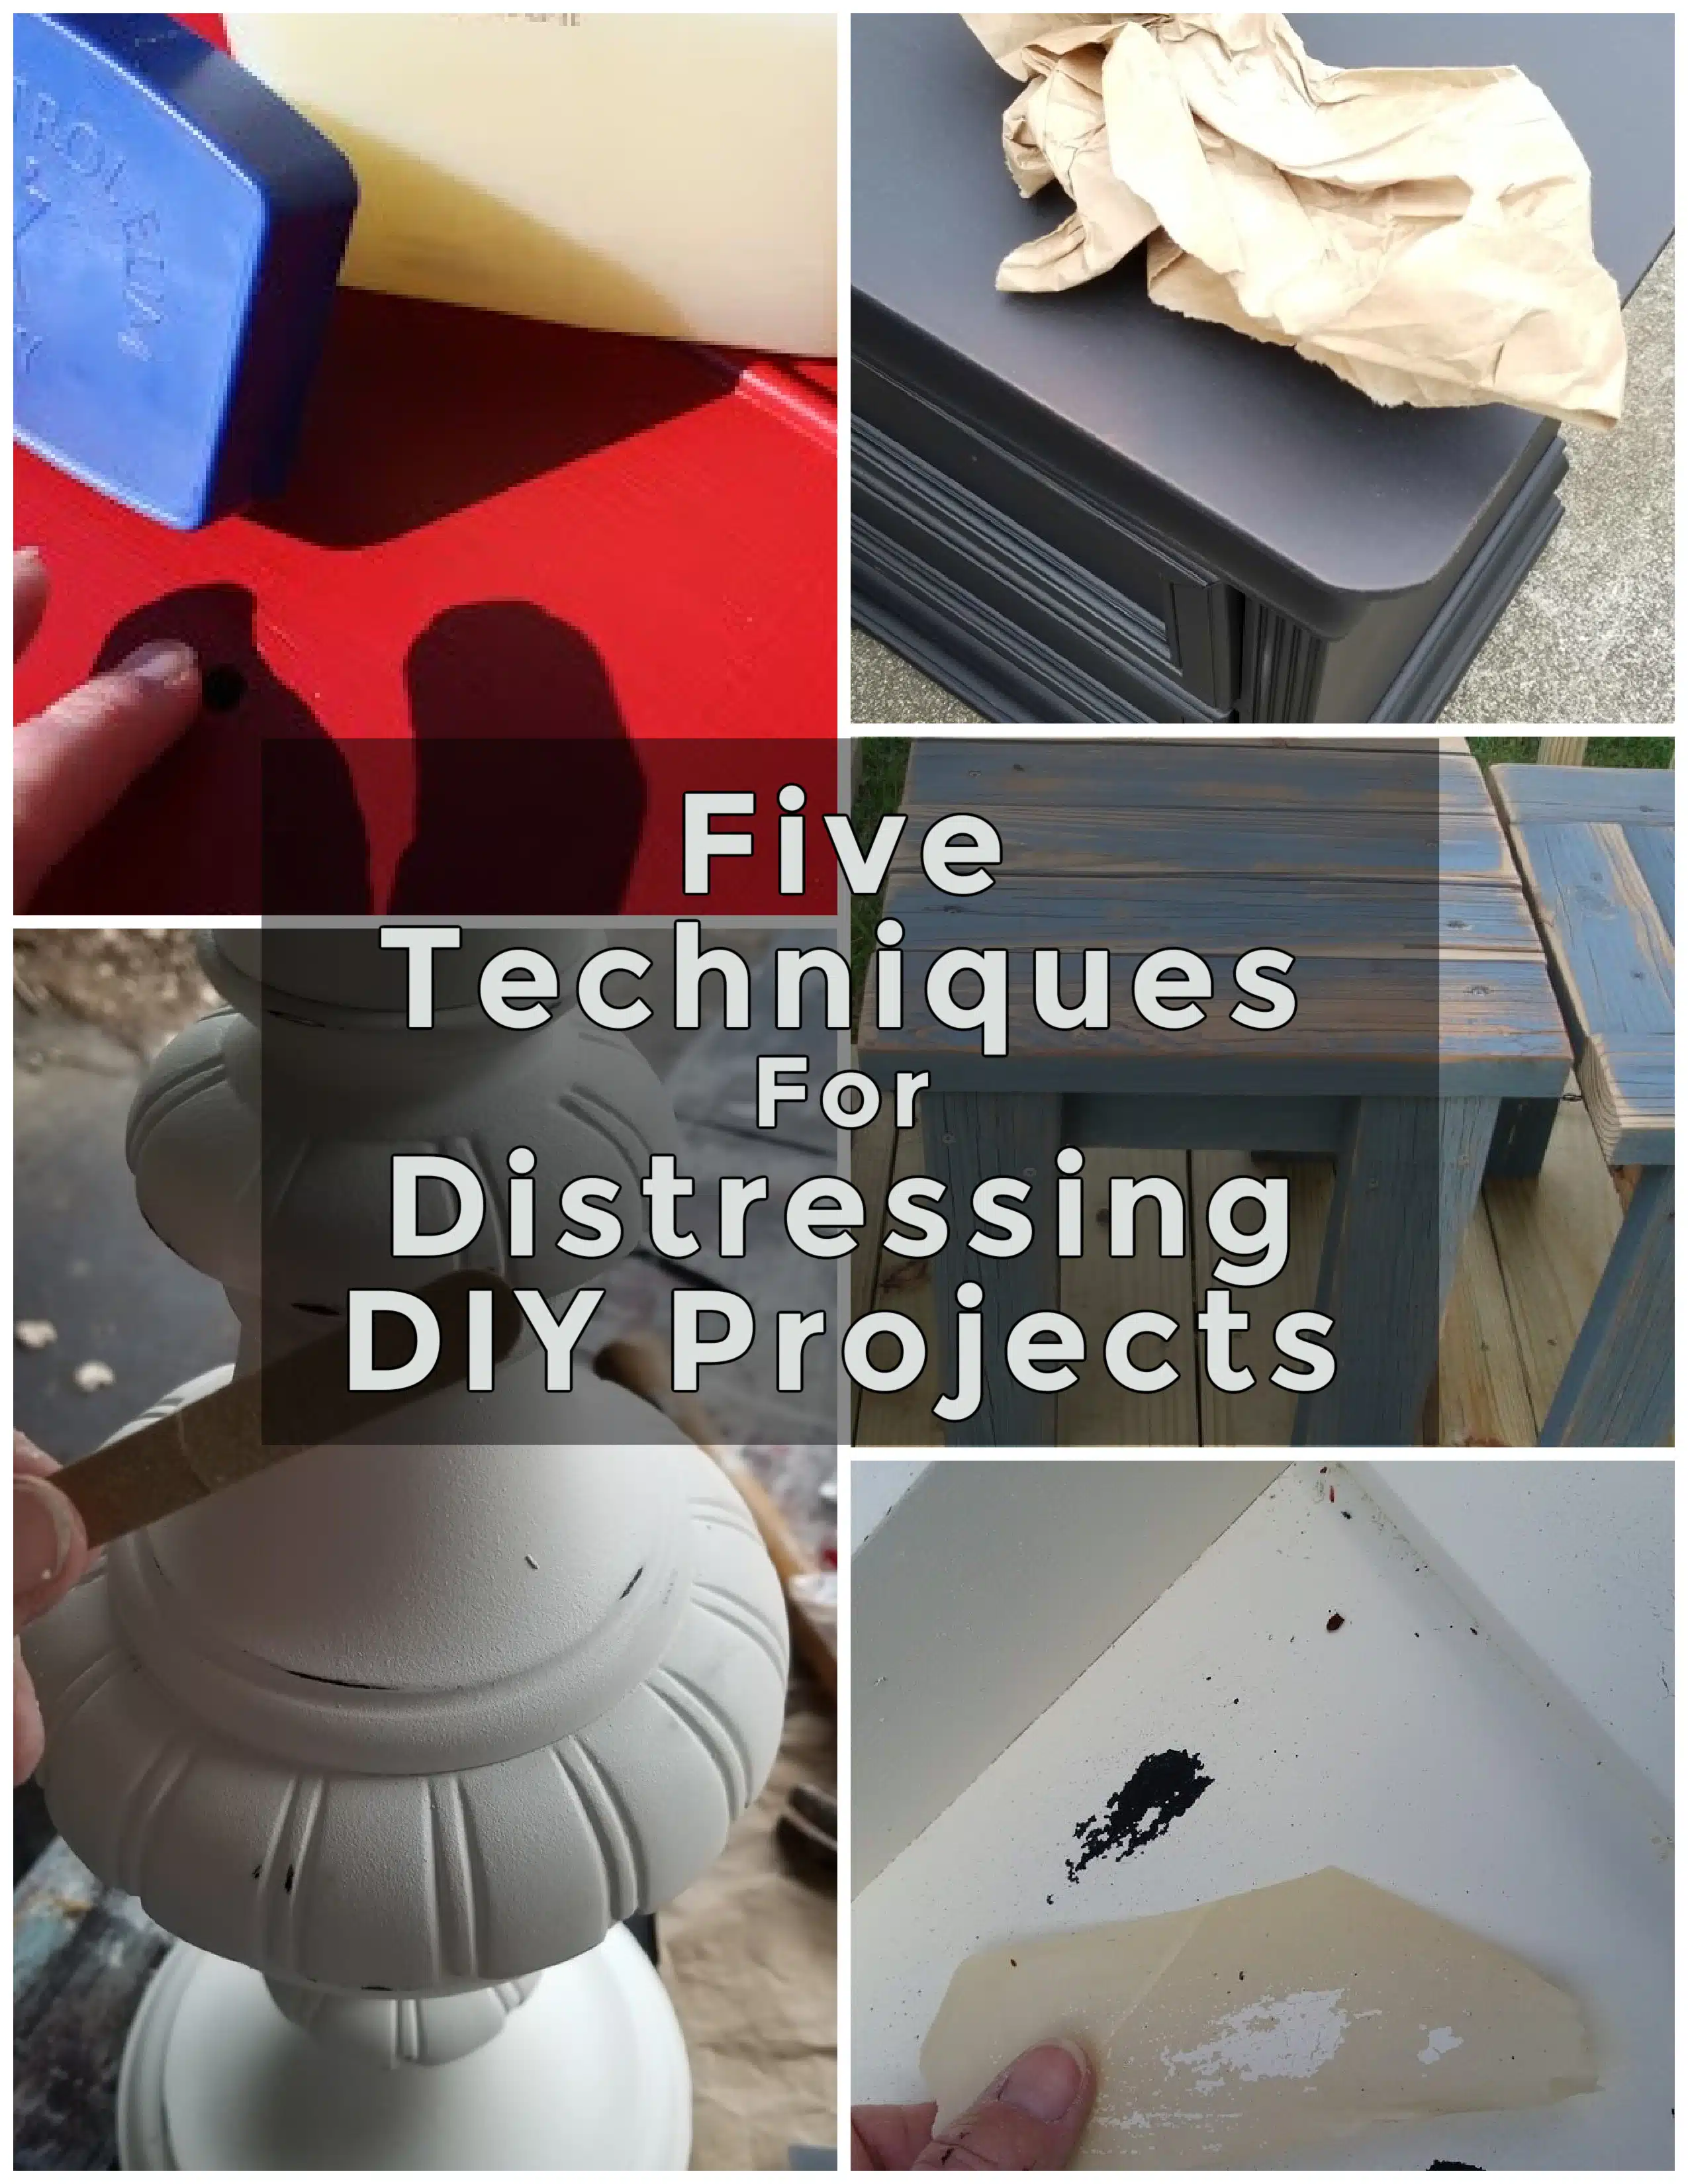 how to distress furniture with spray paint and a sander